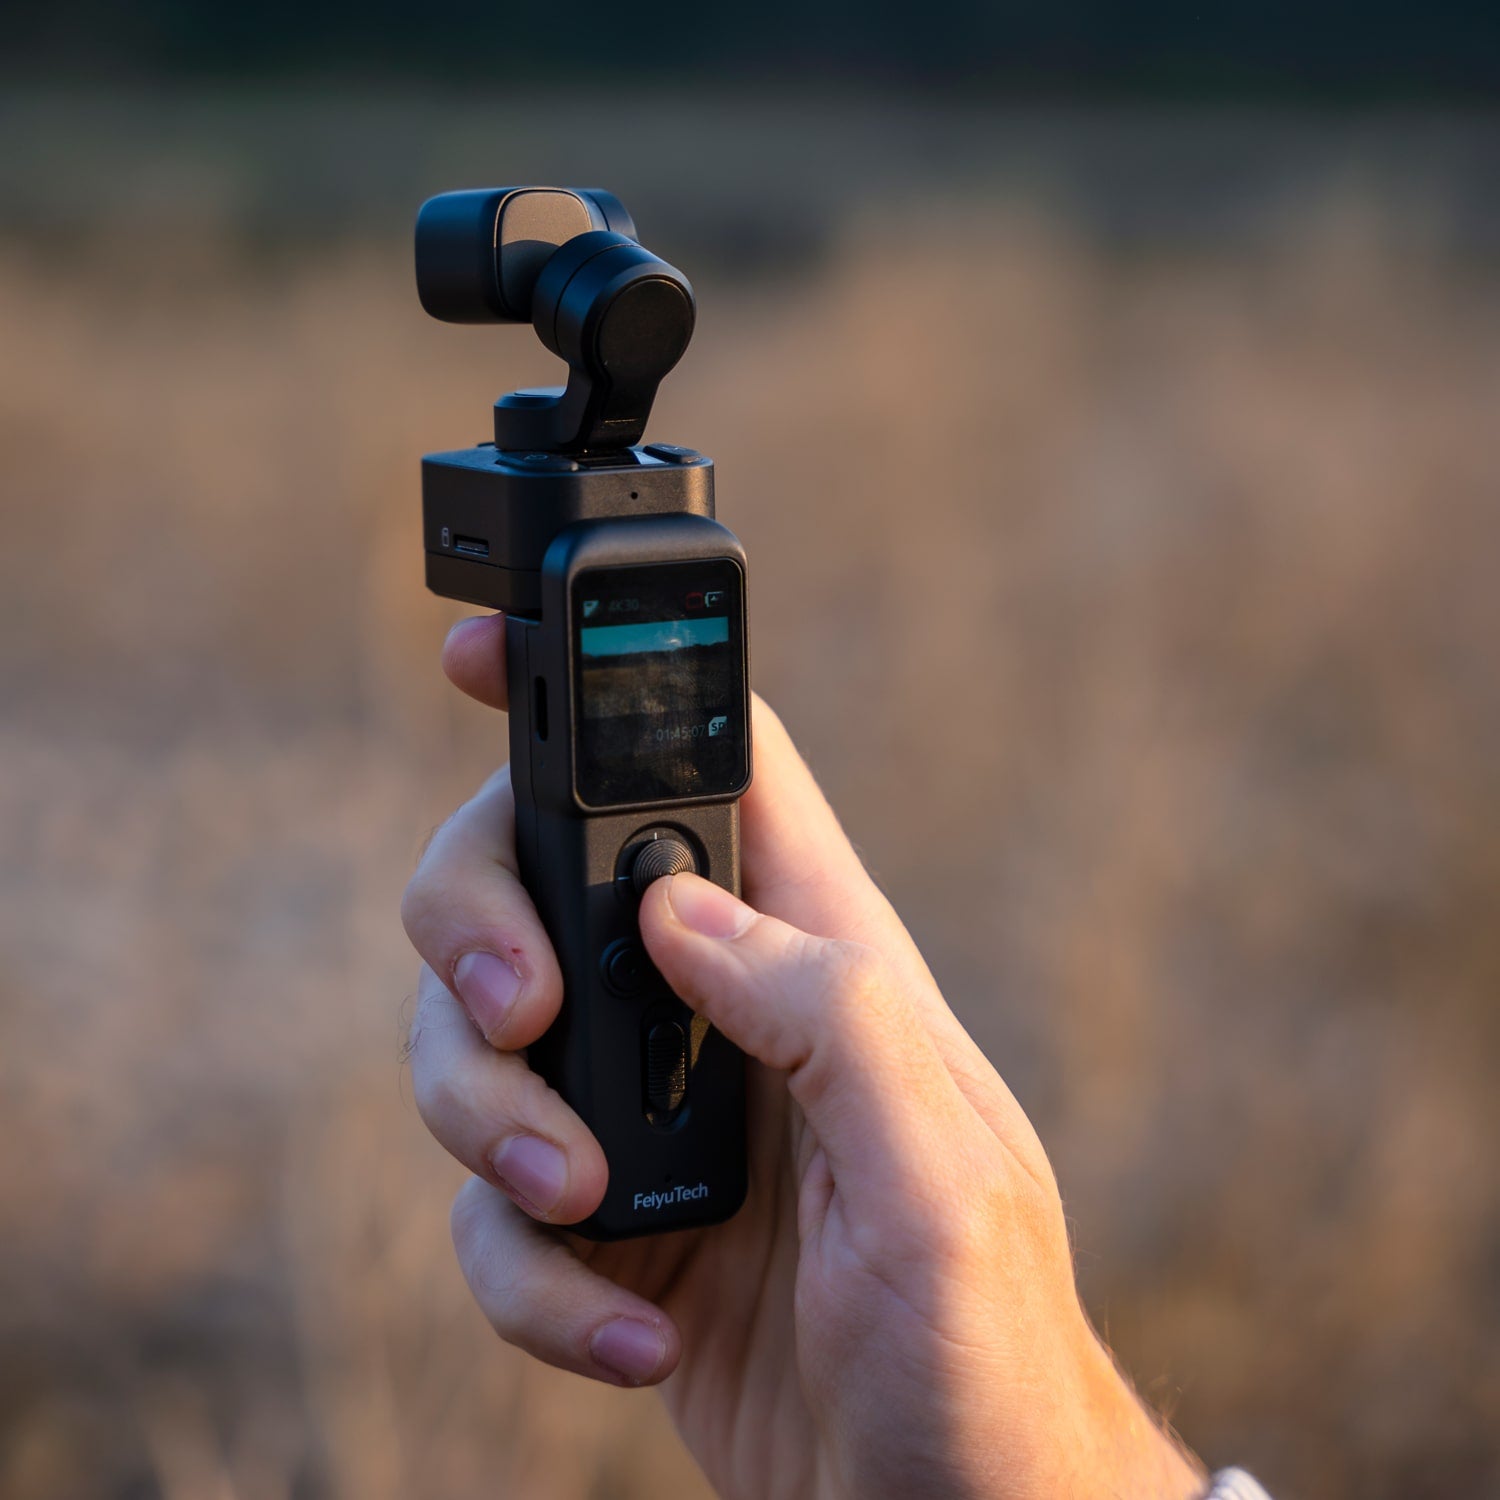 Feiyu Pocket 3 Combines Action Camera and 3-Axis Gimbal Into One, Here's a  Hands-On Look - TechEBlog